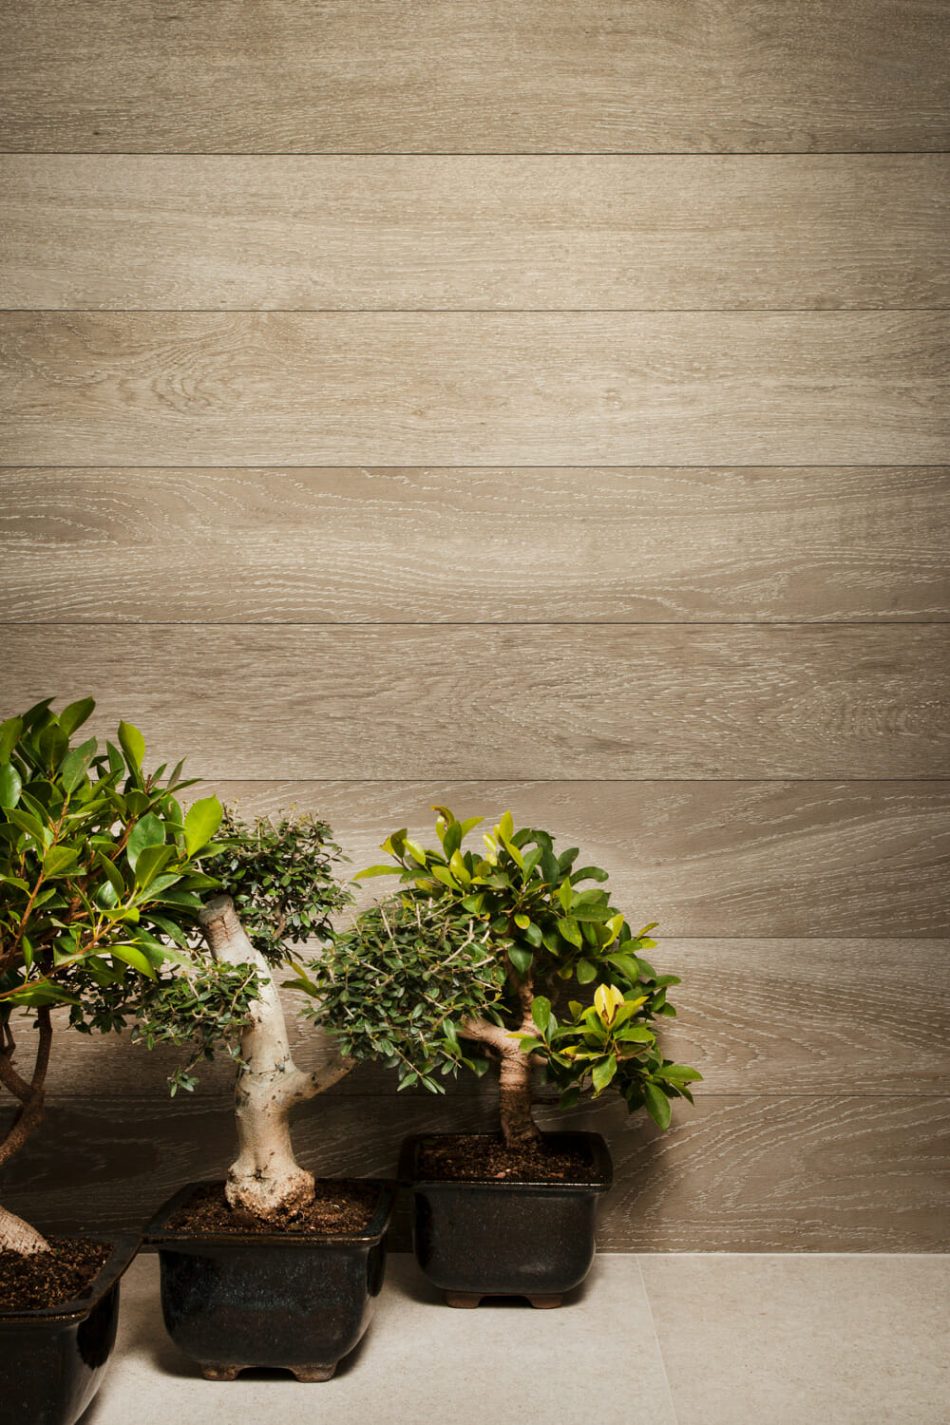 Palmi Tan is a porcelain tile with the look of hardwood floors in light brown color from Spain